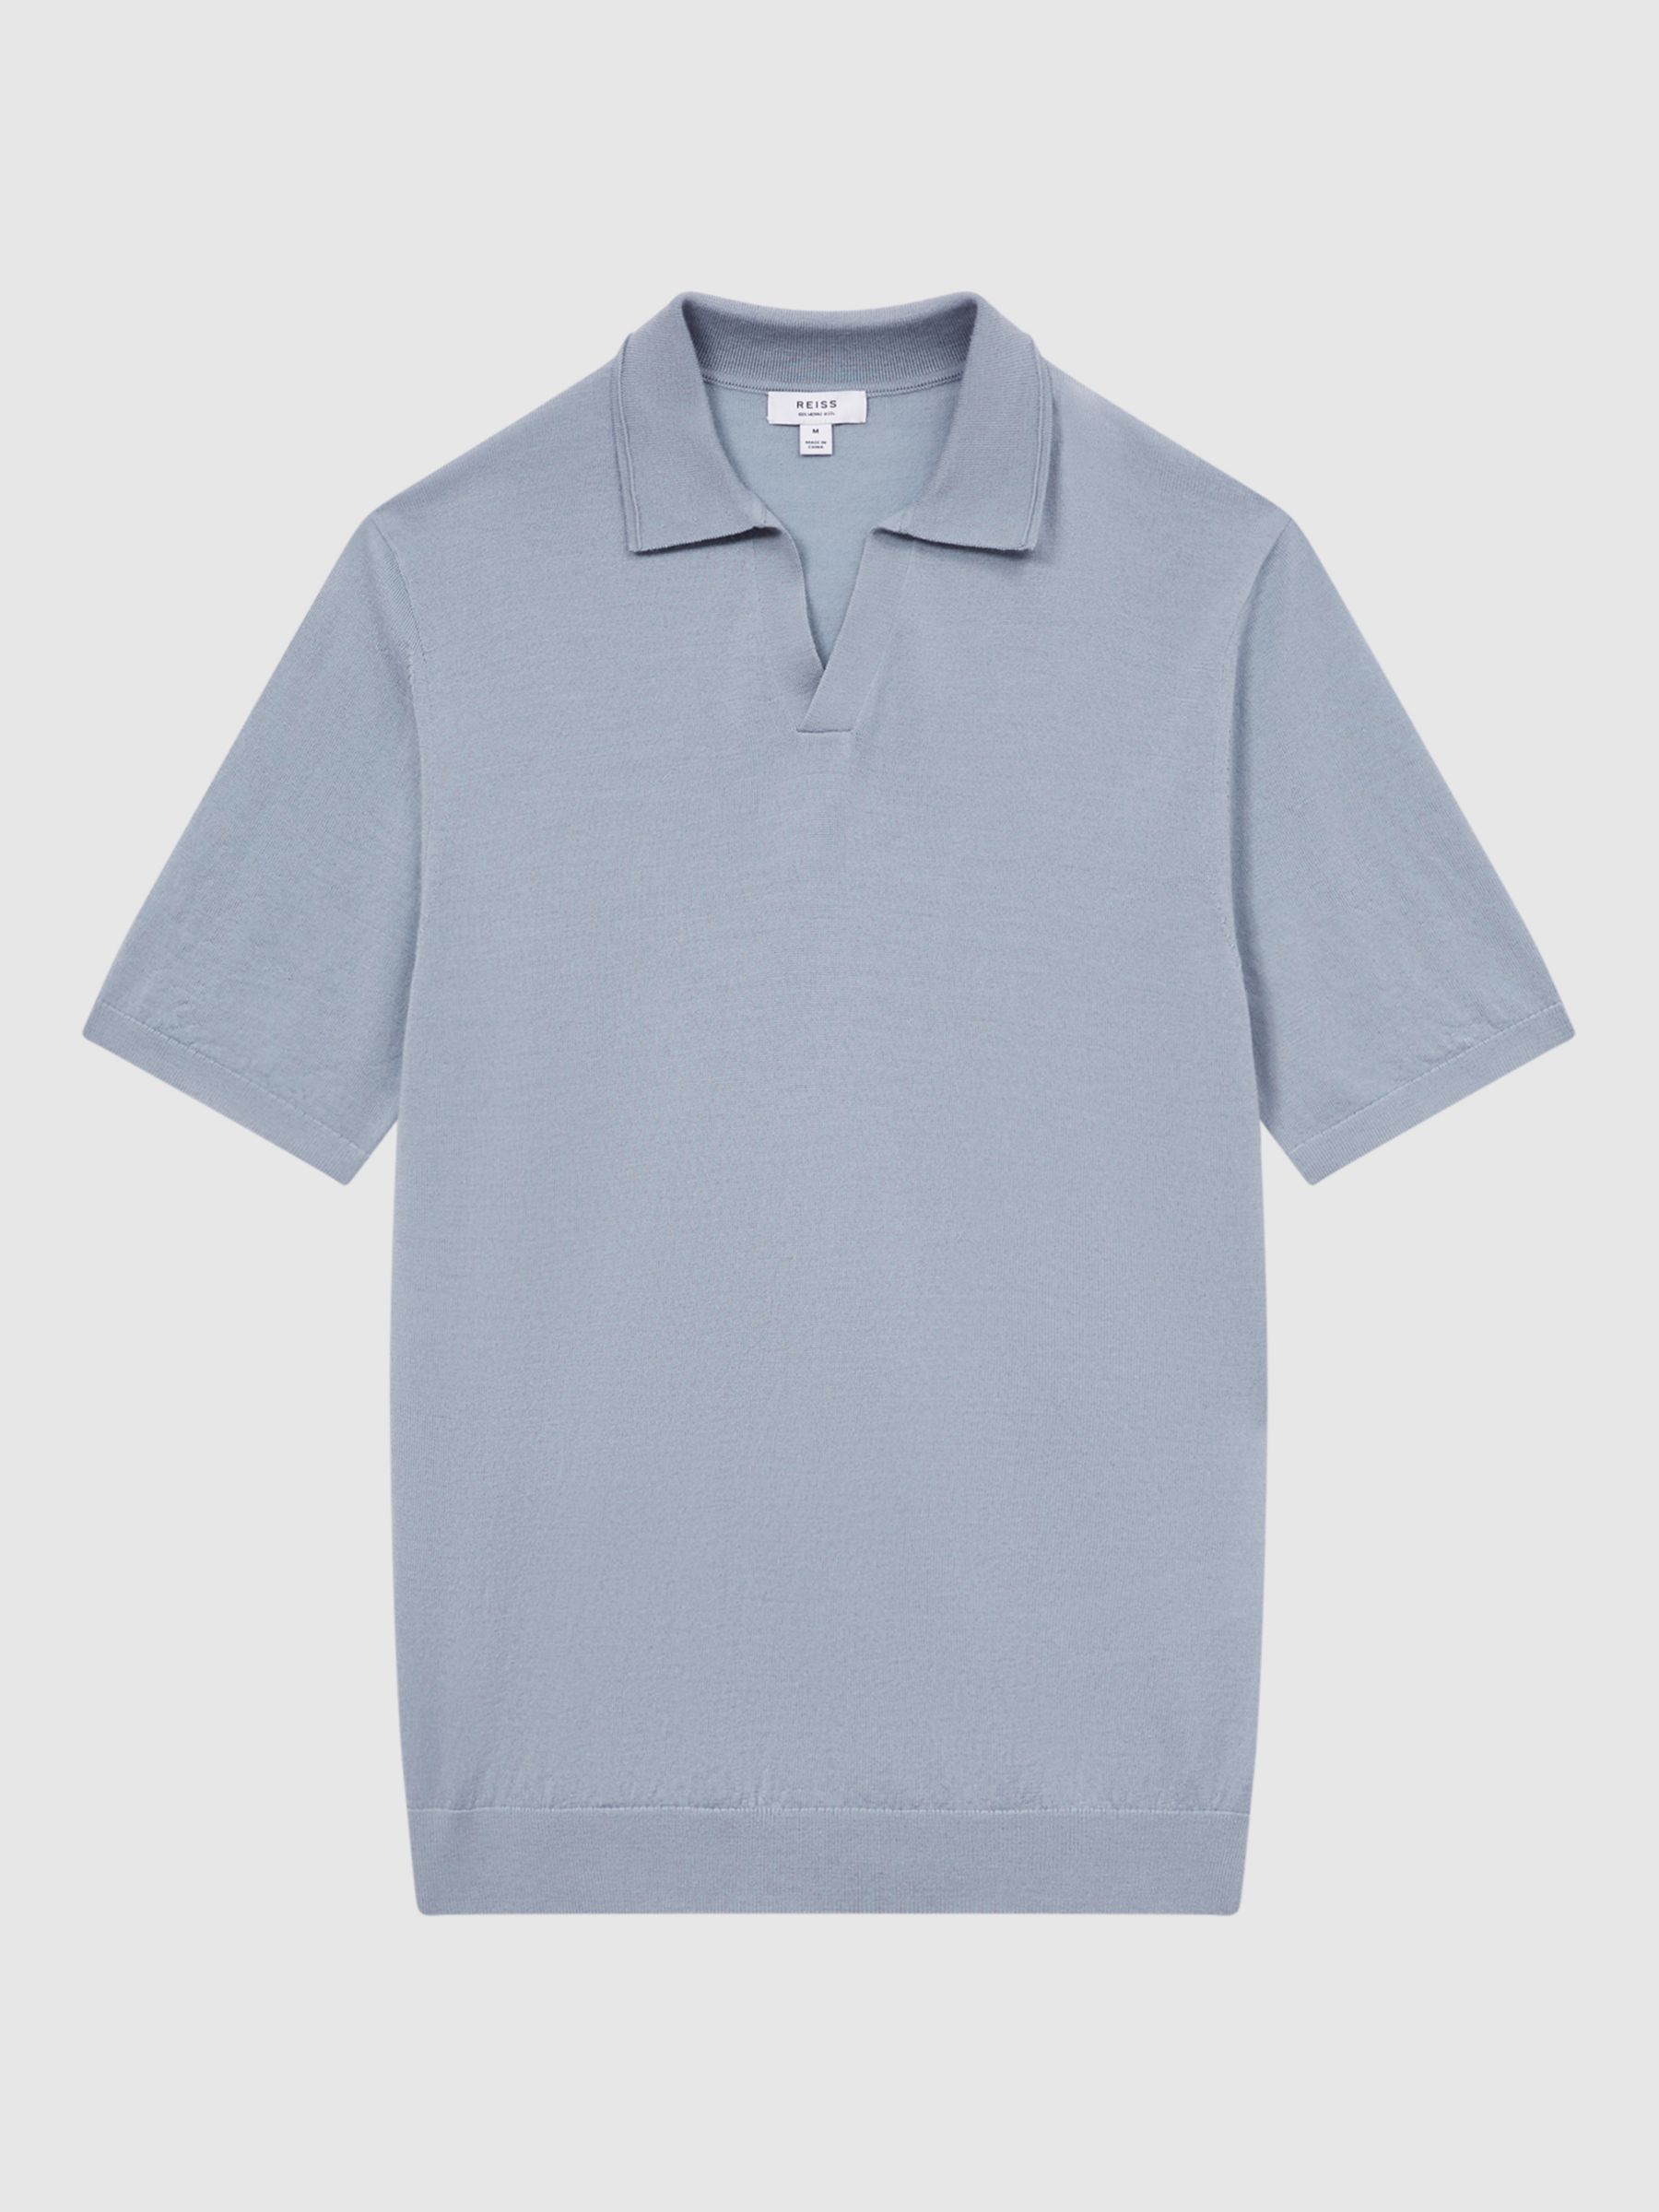 Reiss Duchie Knitted Short Sleeve Polo Top, Dove Blue